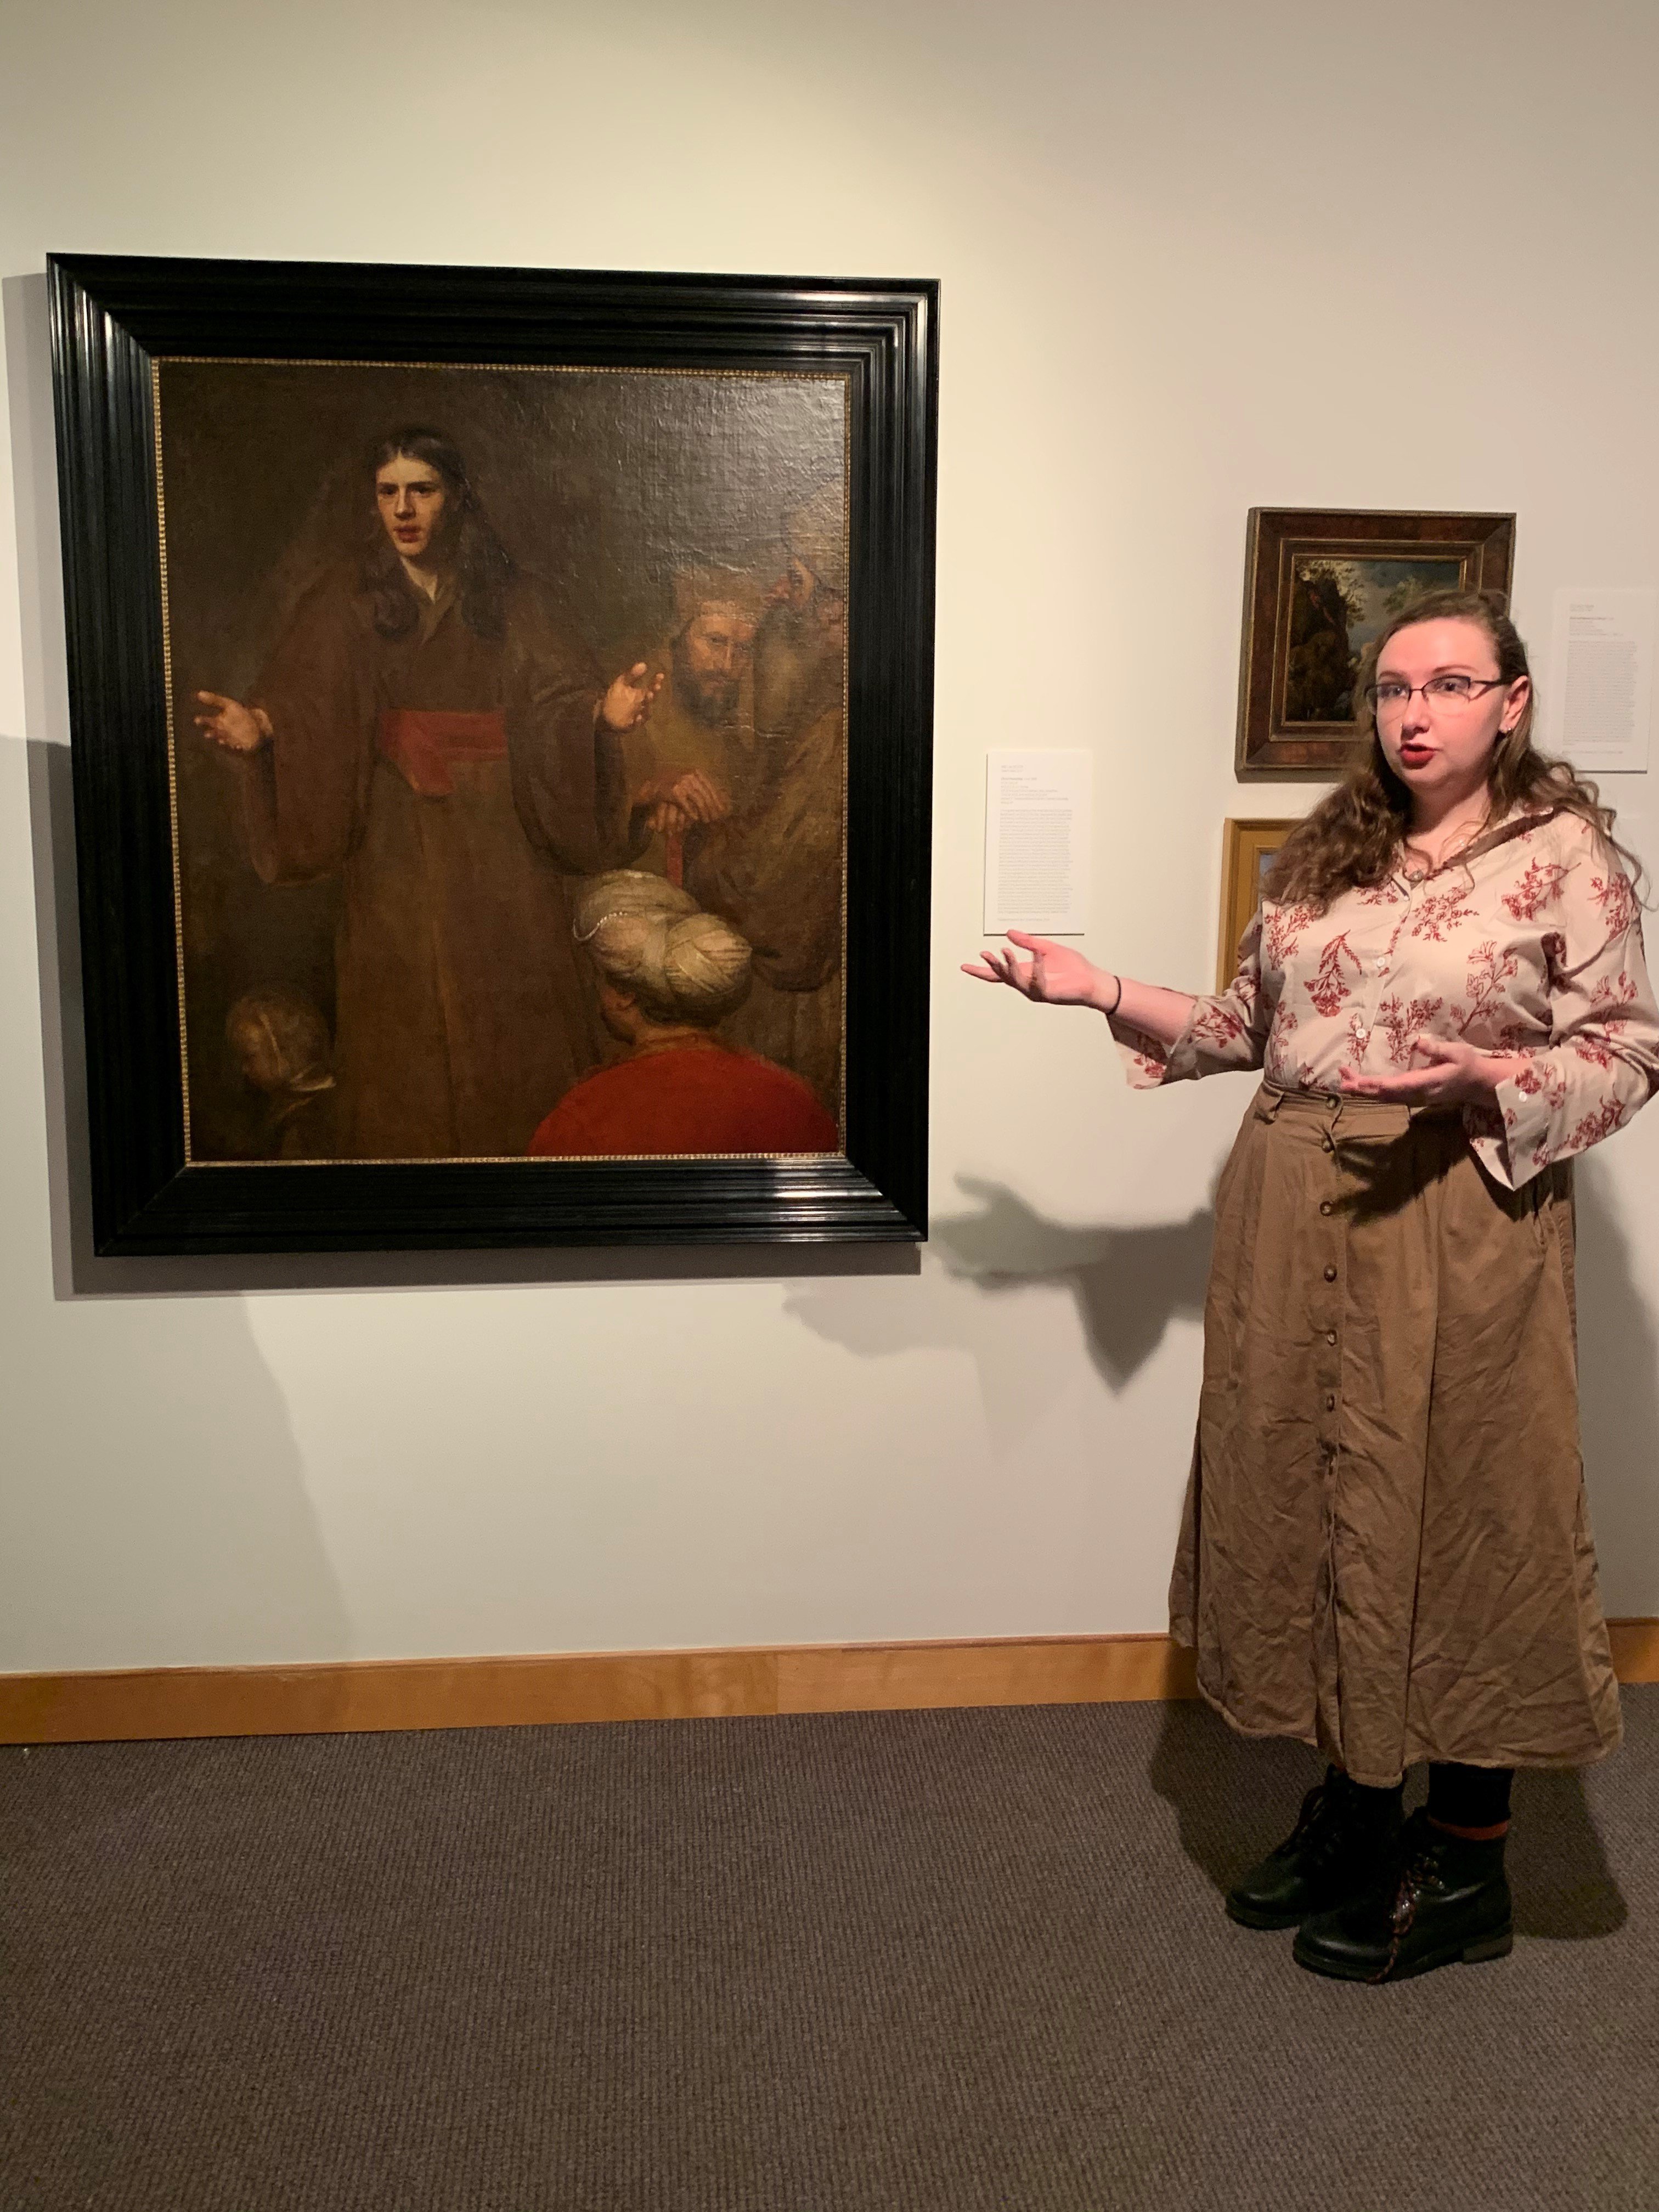 Elisabeth Genter lecturing in front of a painting in a museum.